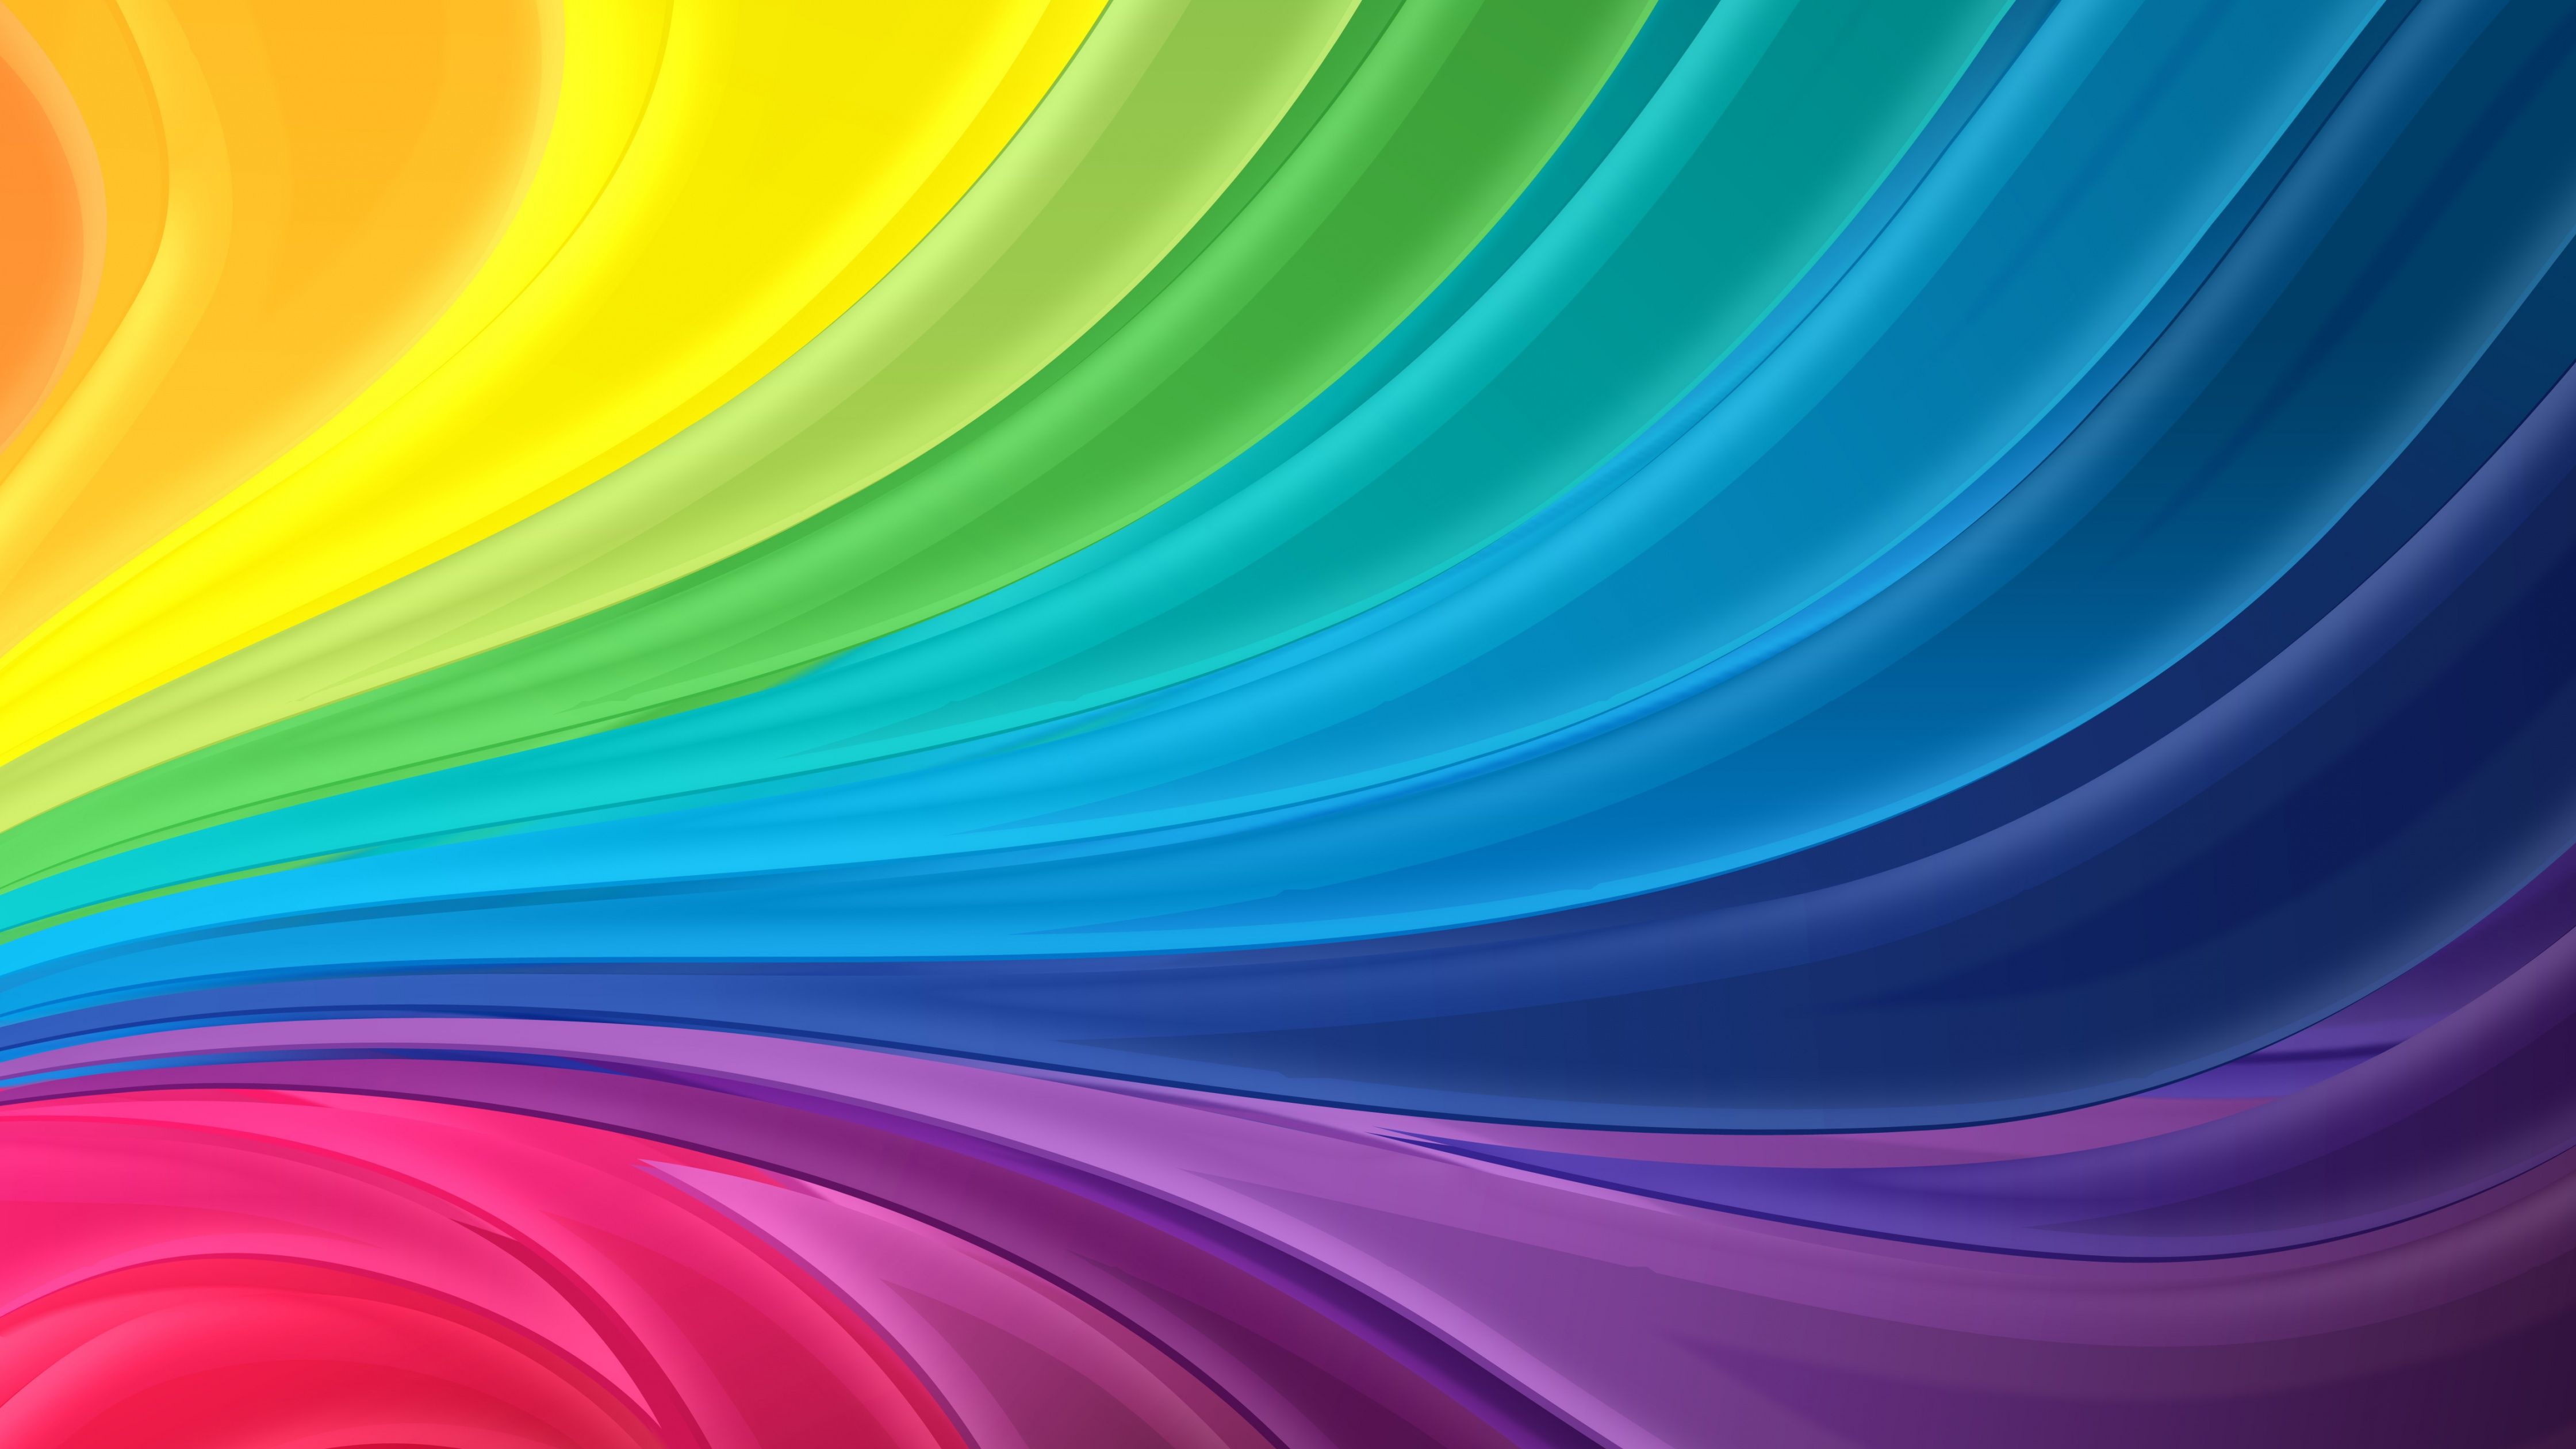 A rainbow colored background with swirling colors - Rainbows